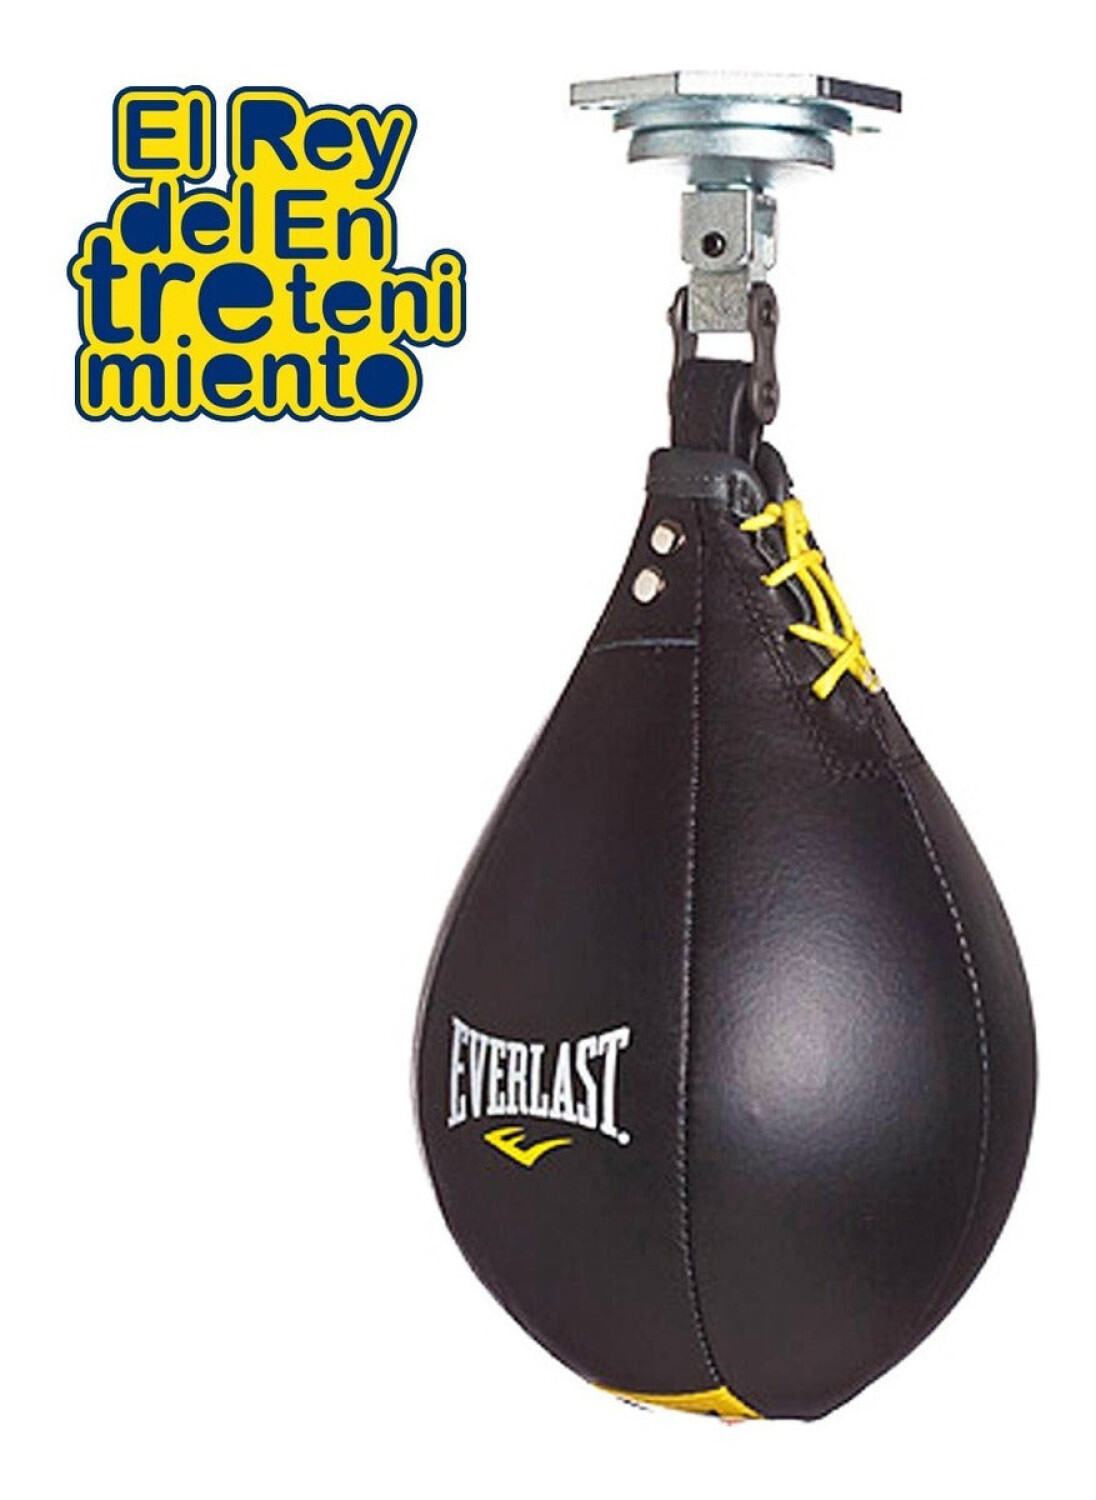 Pera Boxeo Puching Ball Proyec Inflable Cuero Sintético N° 1